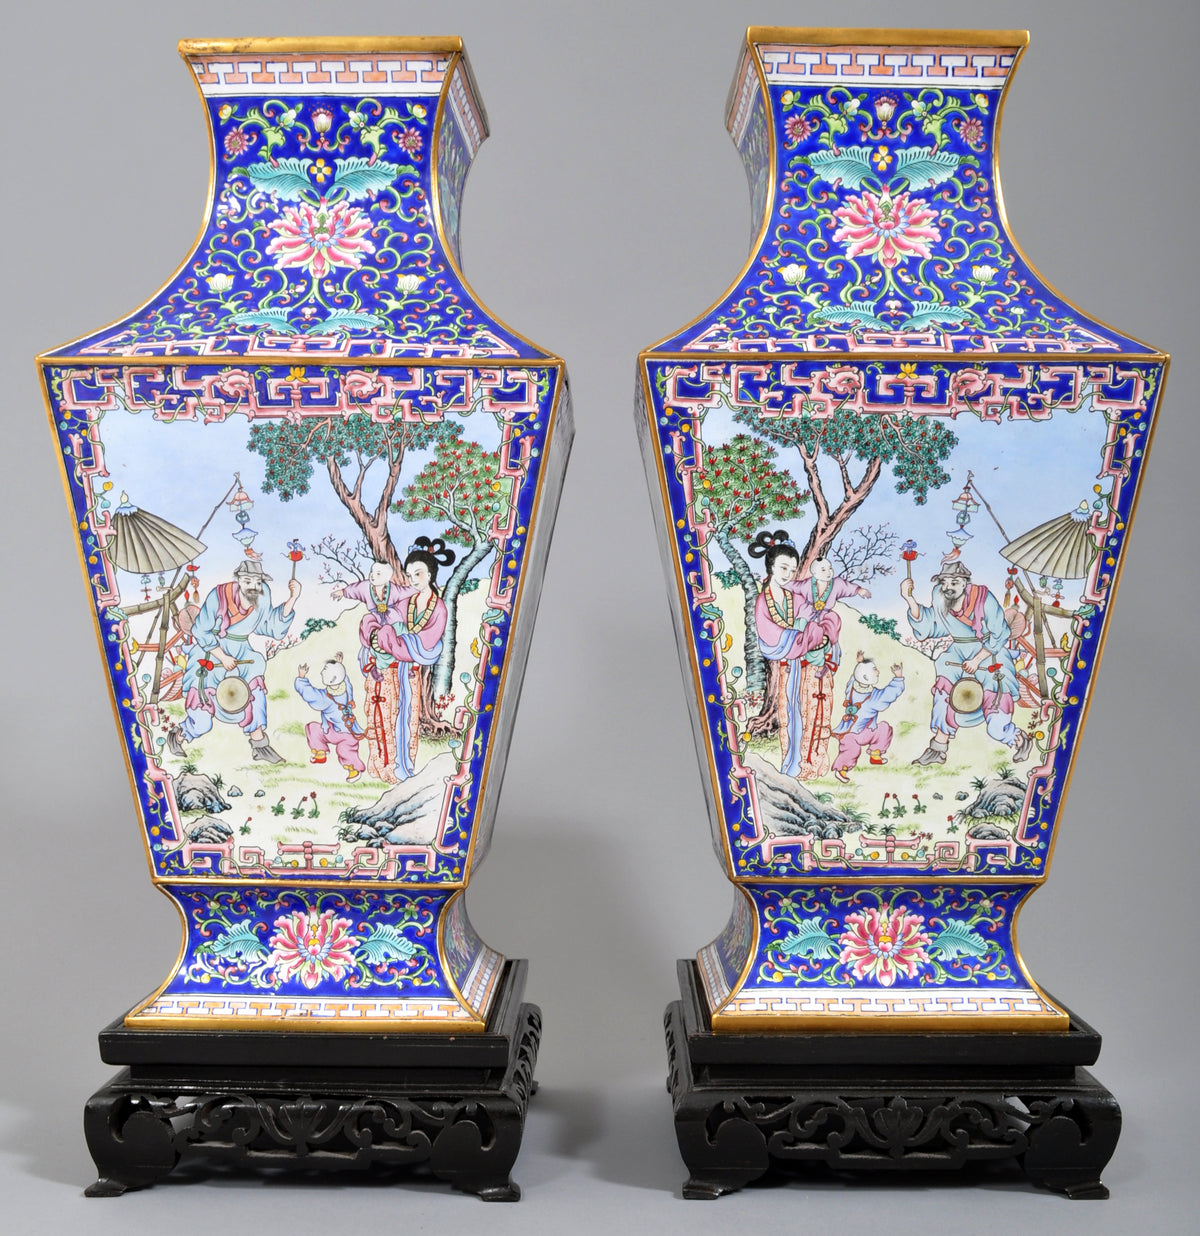 Pair of Large Antique Chinese Qing Dynasty Canton Enamel on Copper Vases, circa 1880